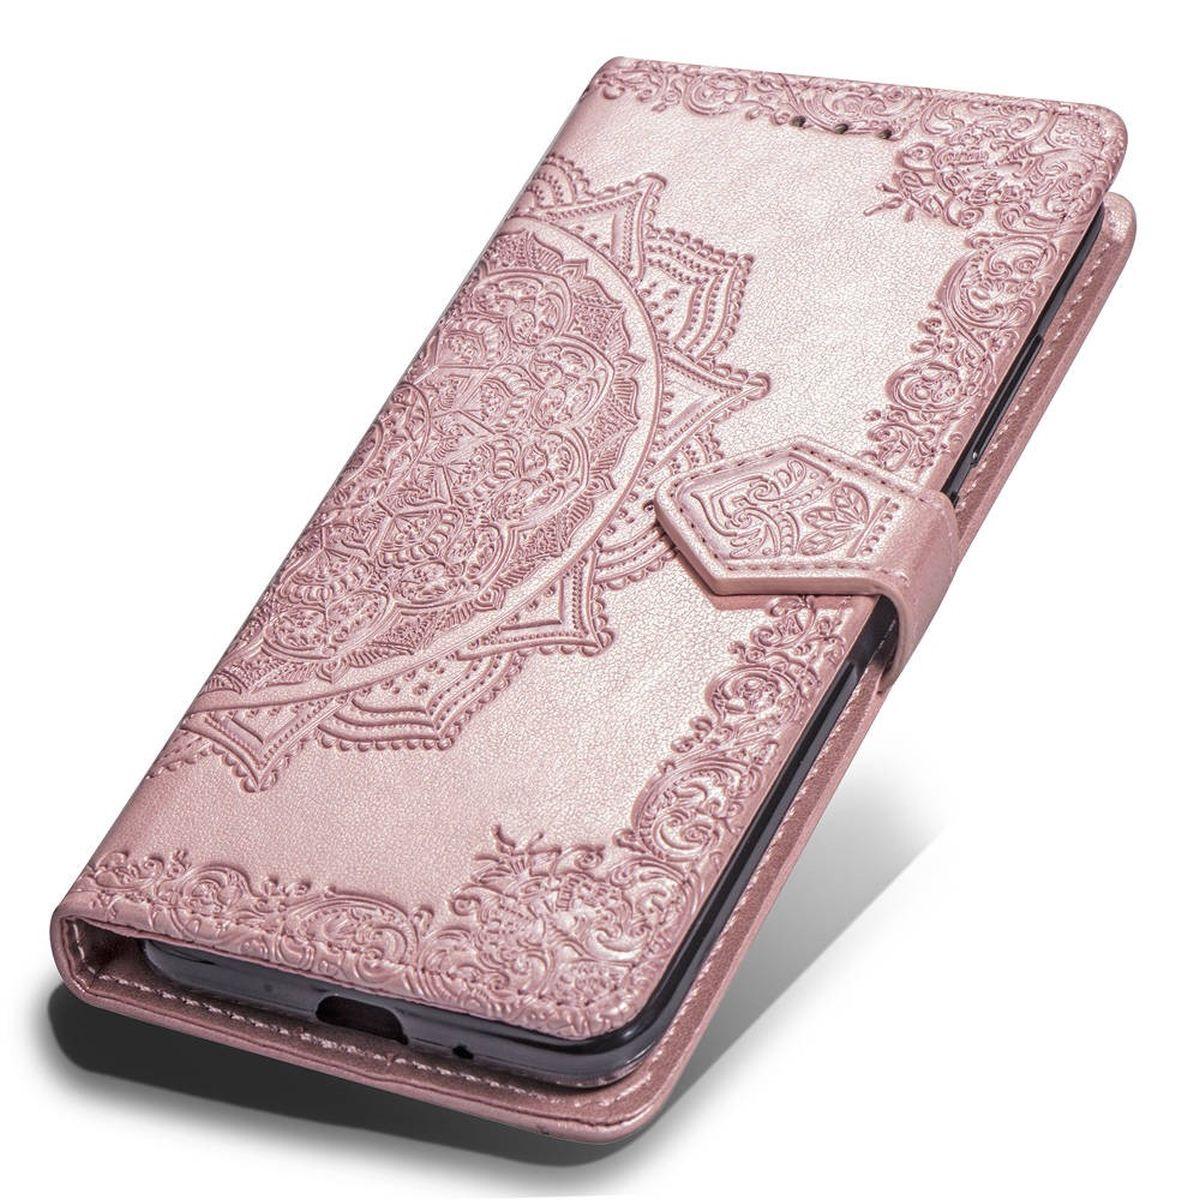 COVERKINGZ Klapphülle mit Mandala Muster, Max, Xs iPhone Apple, Bookcover, Rosegold